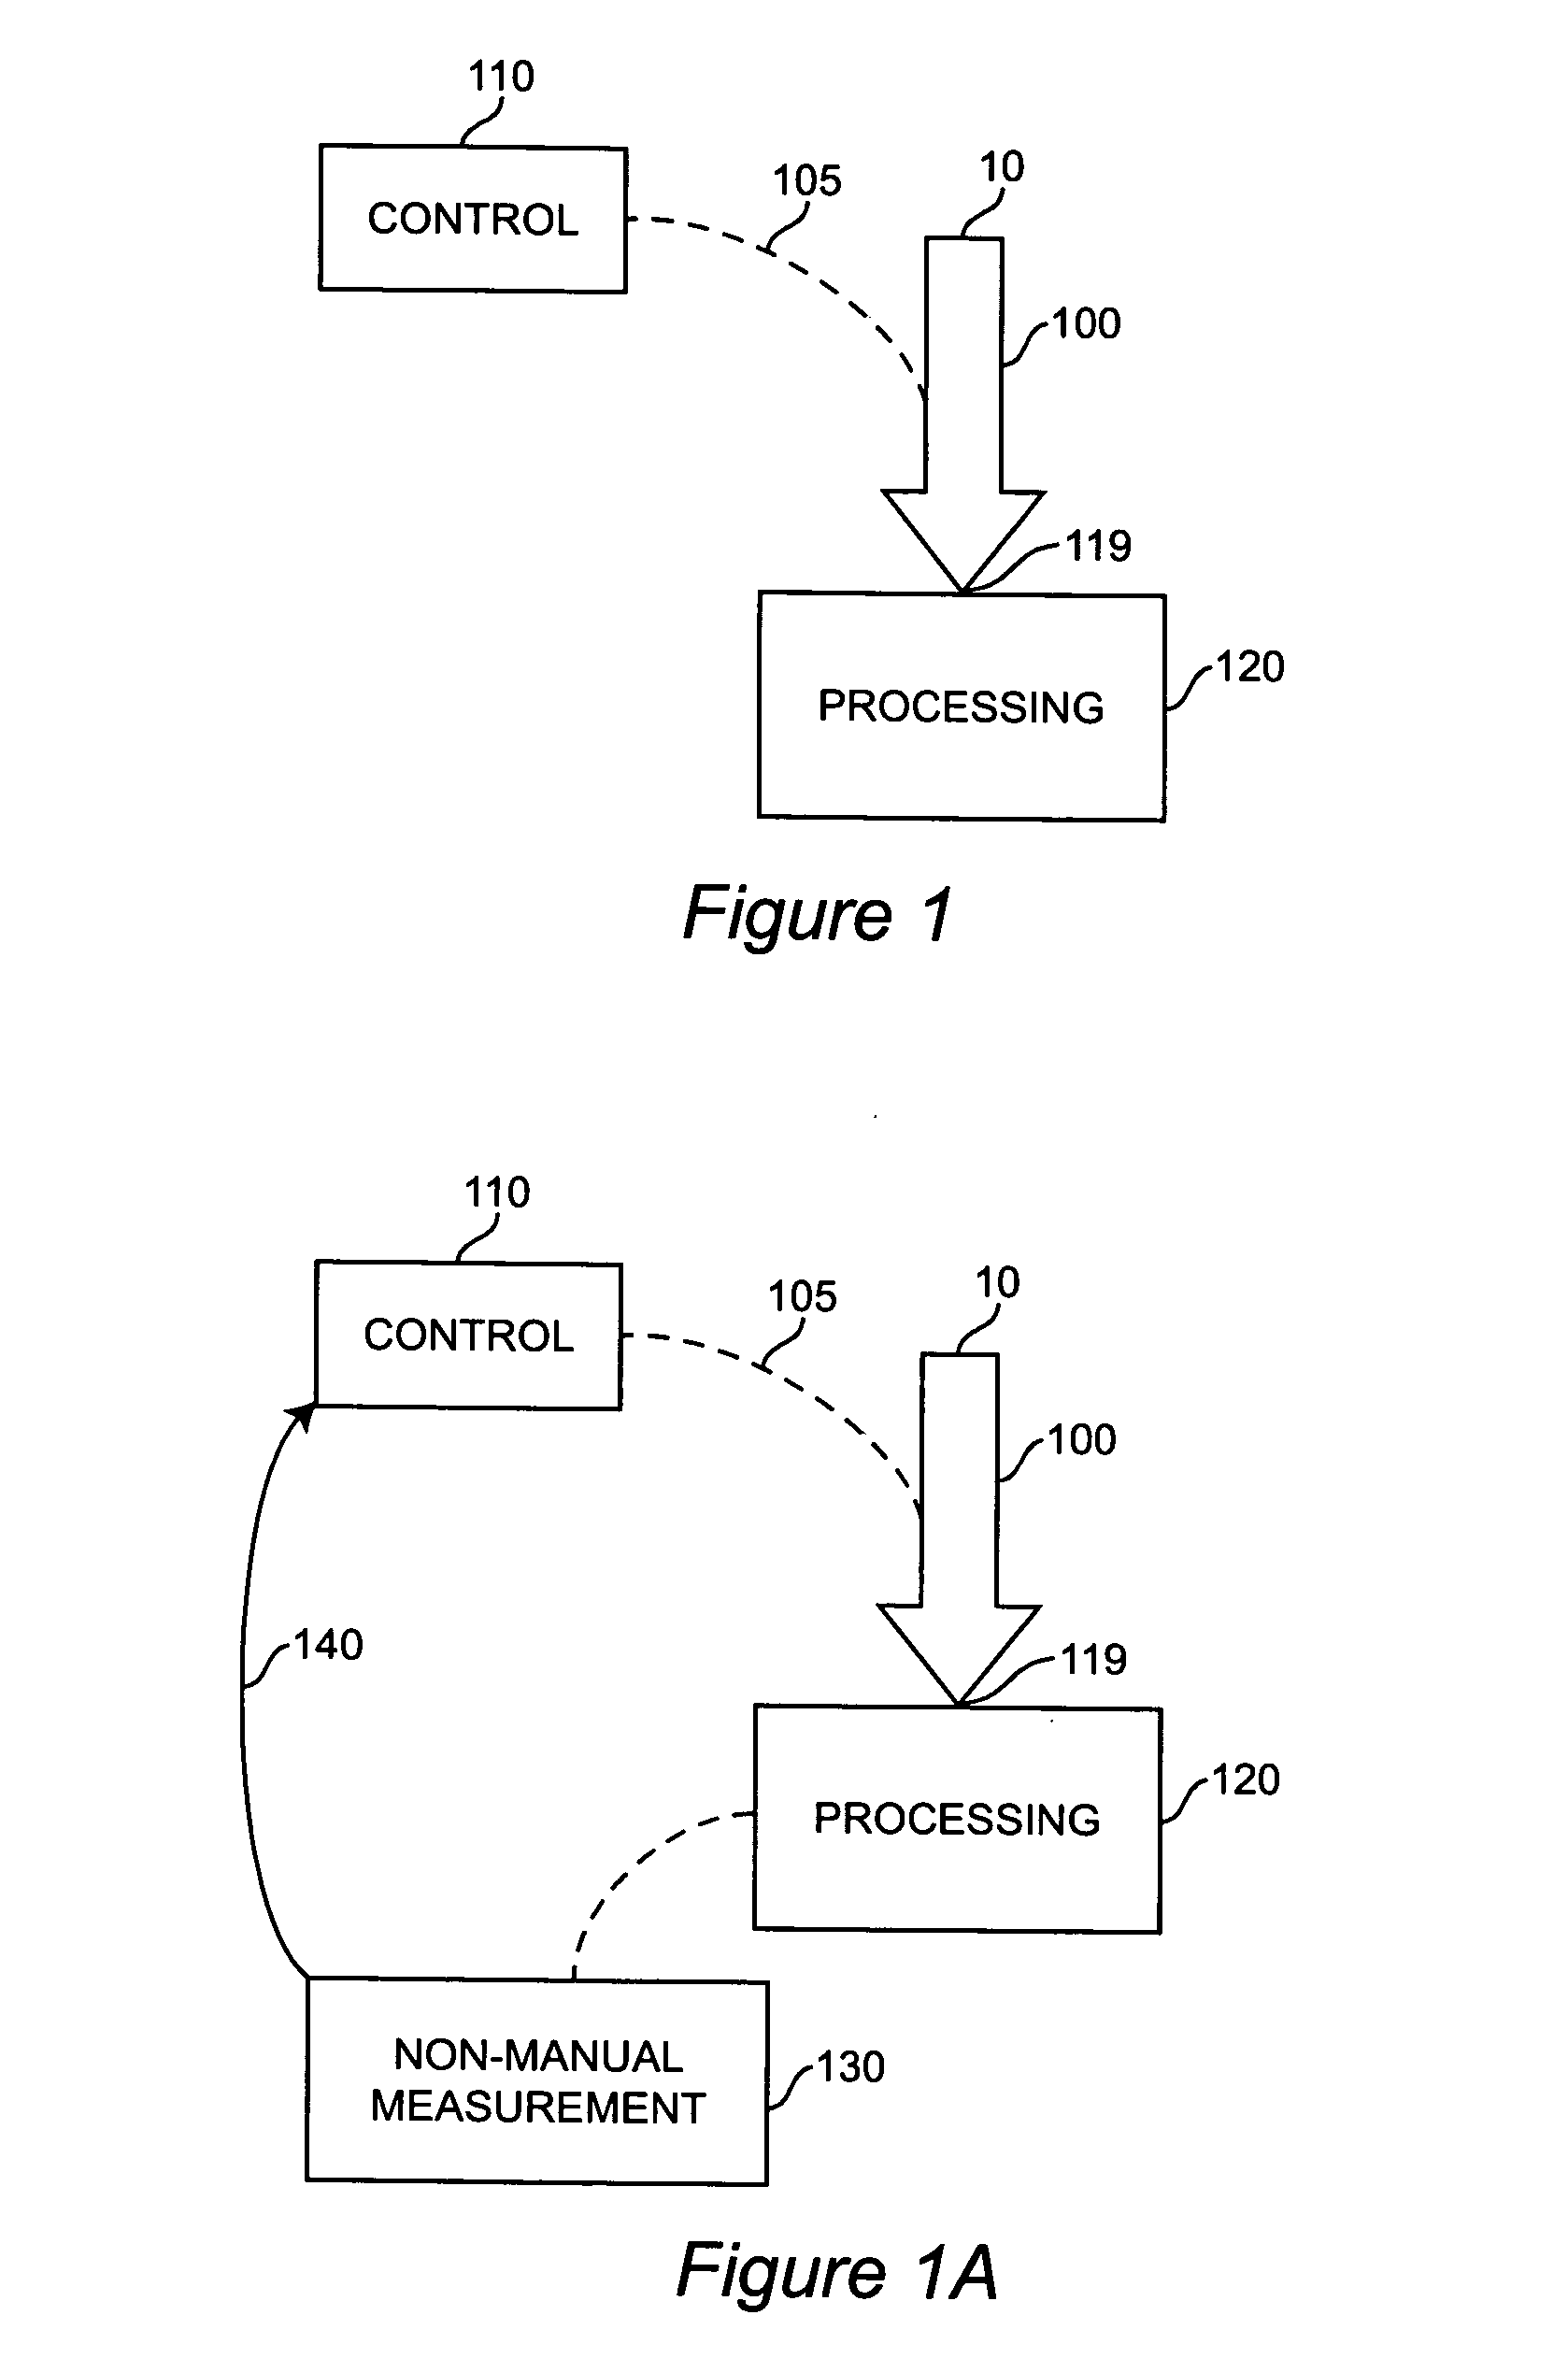 Feeding mechanism auto-adjusting to load for use in automatic high-security destruction of a mixed load, and other feeding systems